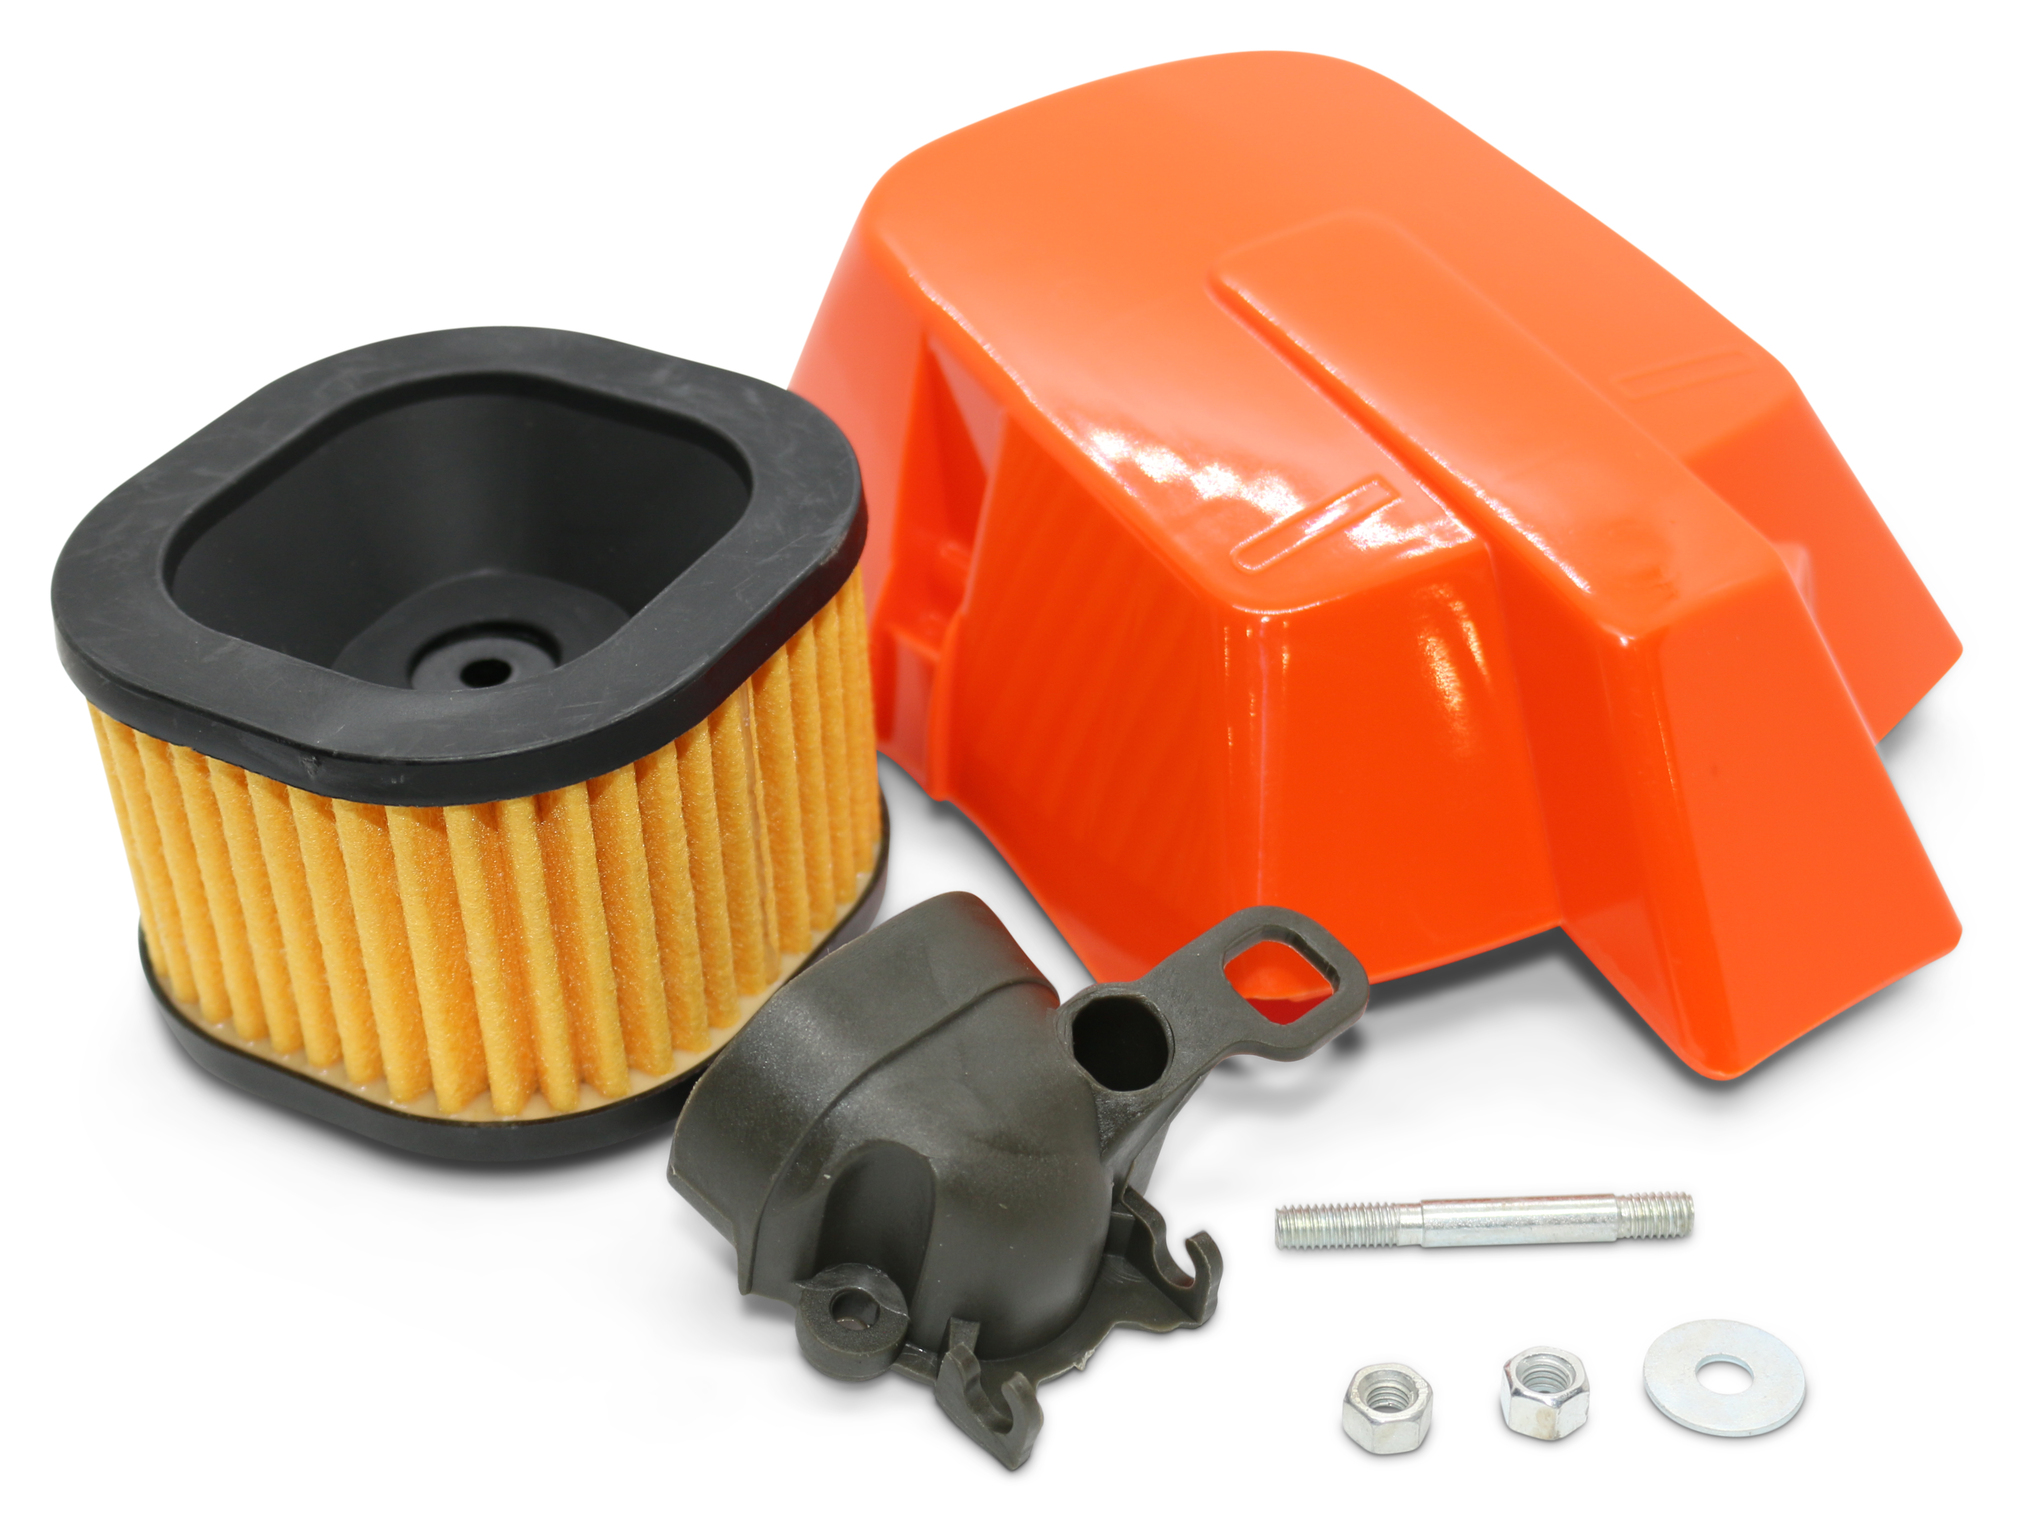 HD Air Filter Cover Intake Adaptor For Husqvarna 362 365 372 372 XP Chainsaw